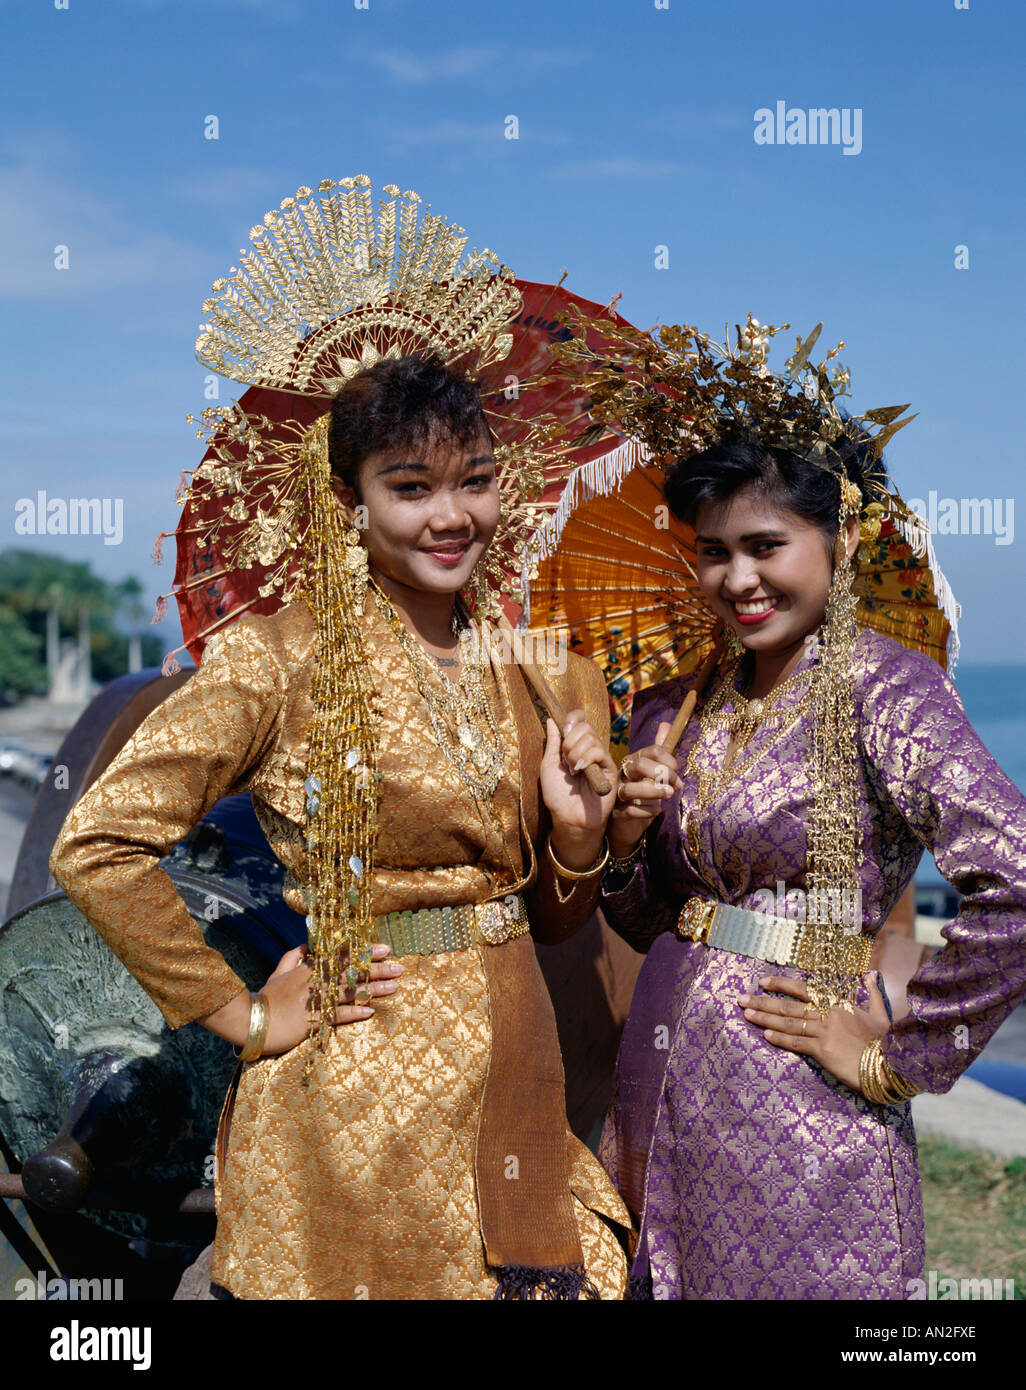 Traditional Clothes of Malaysia - Malaysian Cultural Outfits